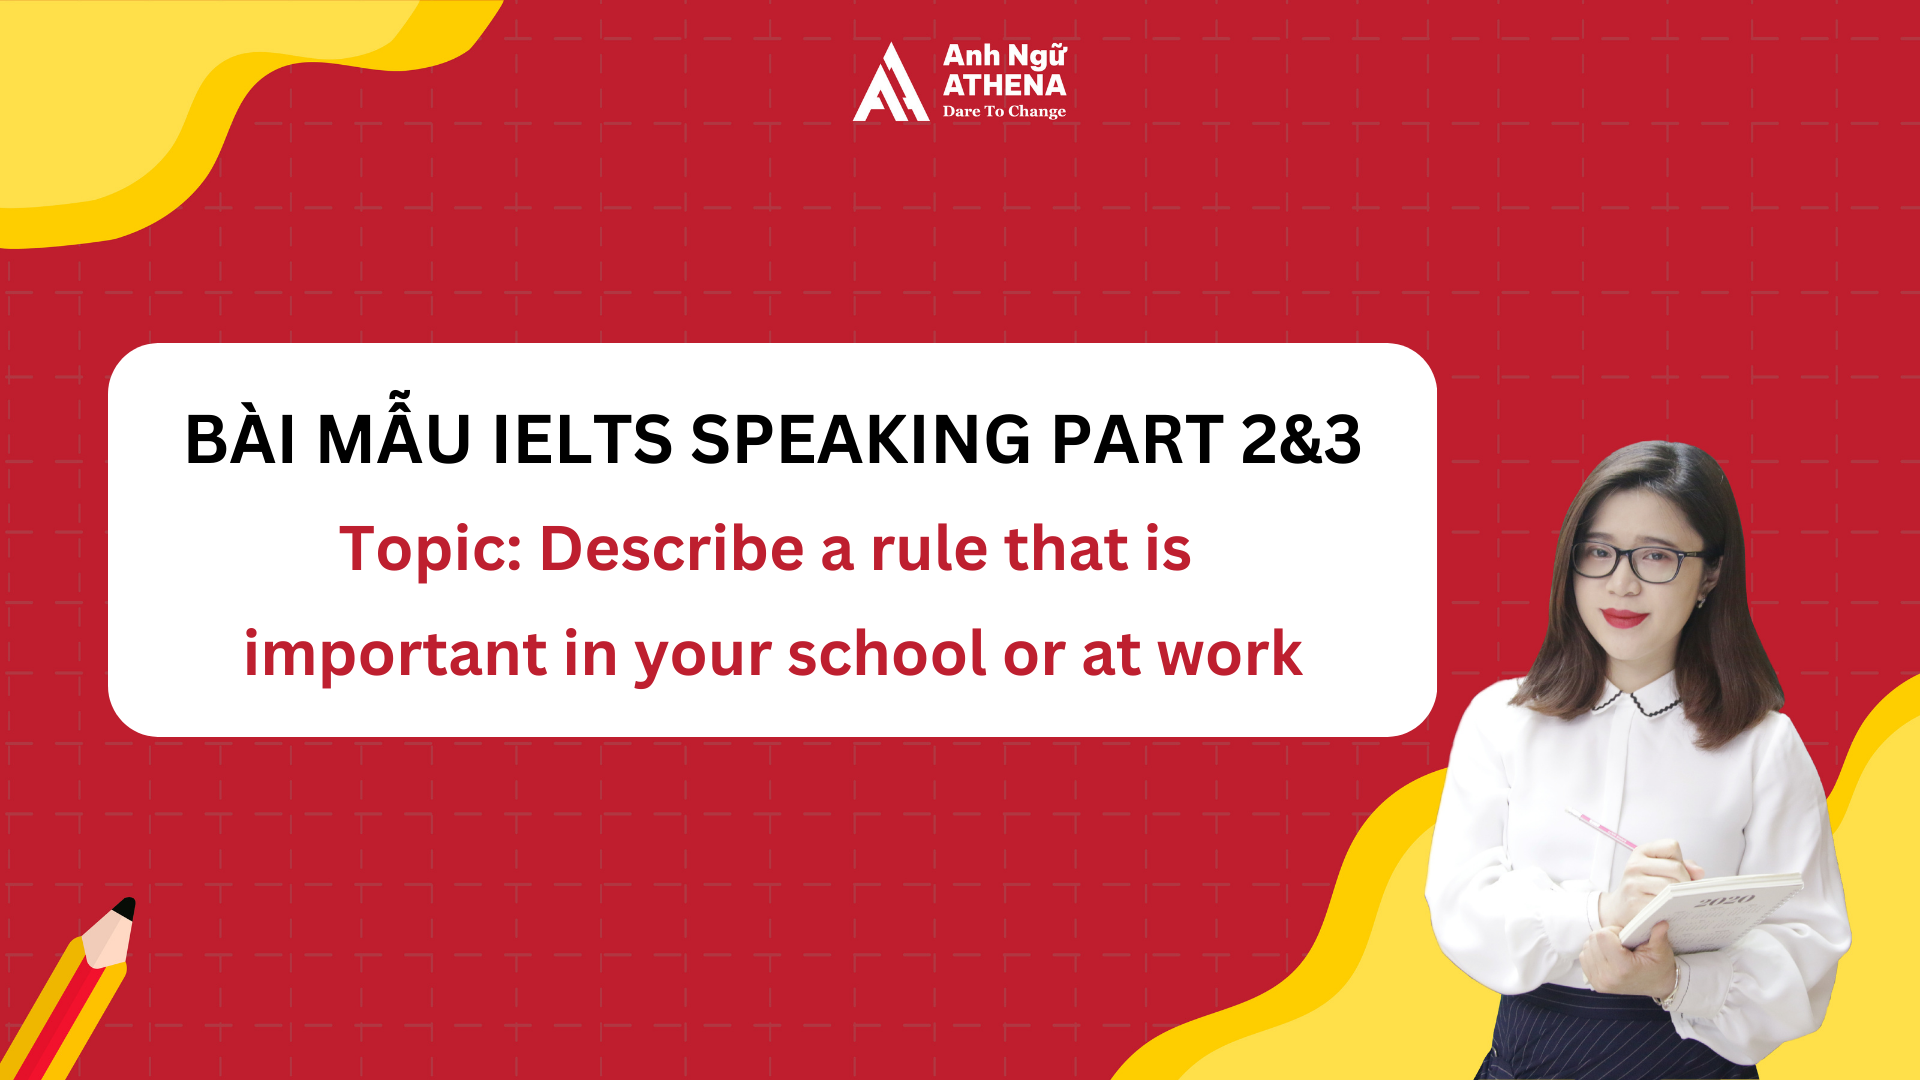 Bài mẫu IELTS Speaking Part 2&3 - Describe a rule that is important in your school or at work